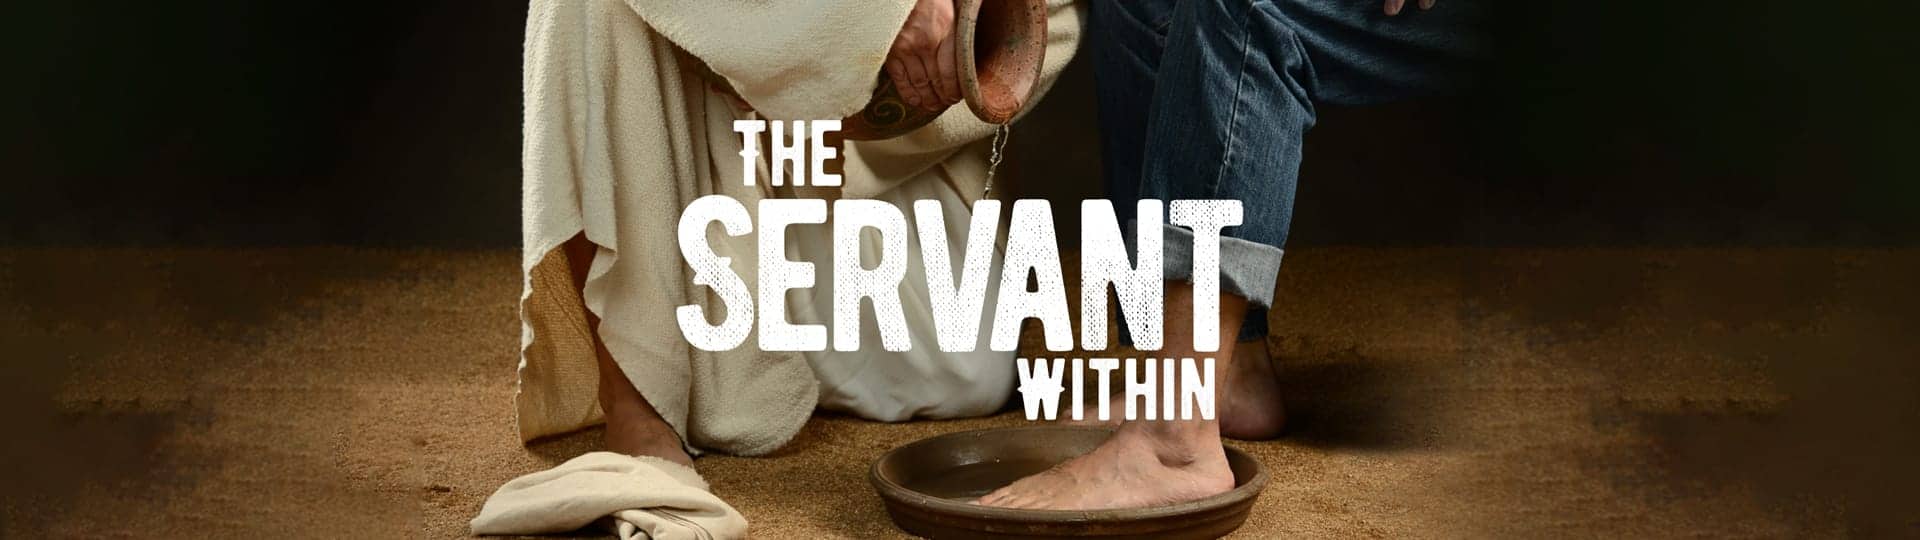 The Servant Within